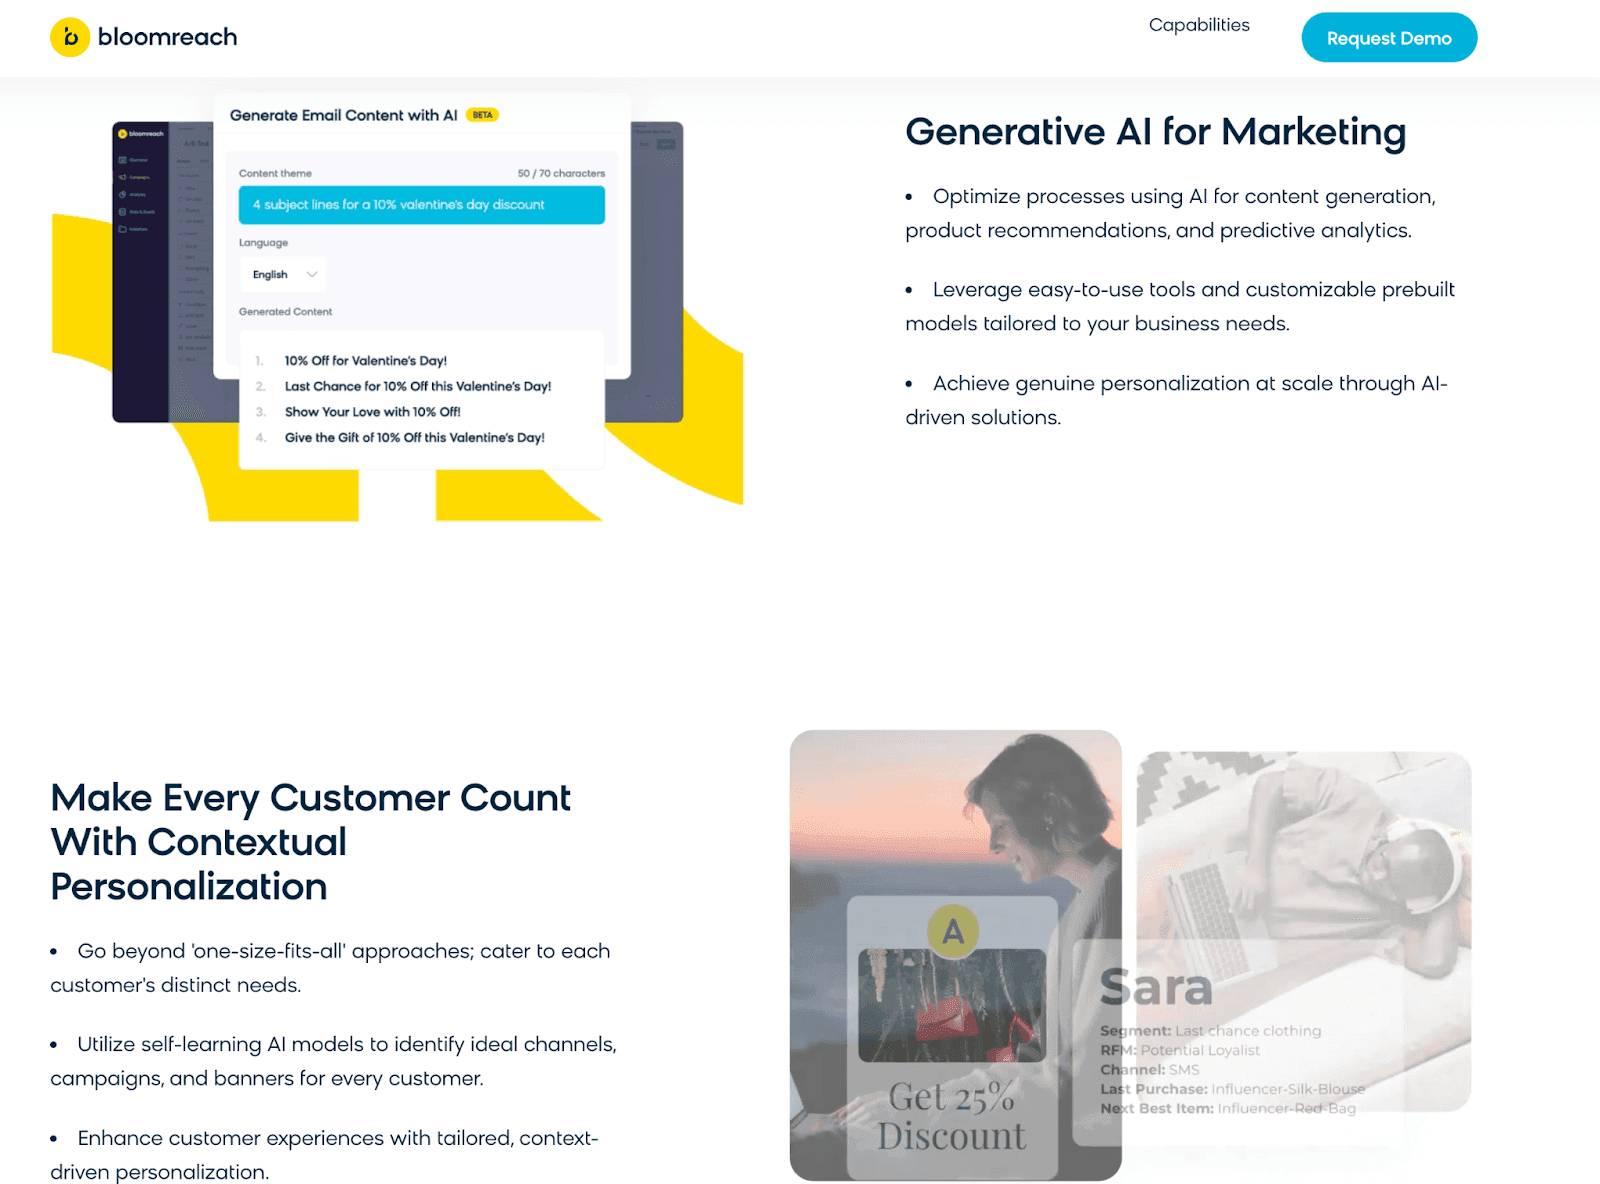 Bloomreach AI website - Generative AI for marketing - Make every customer count with contextual personalization